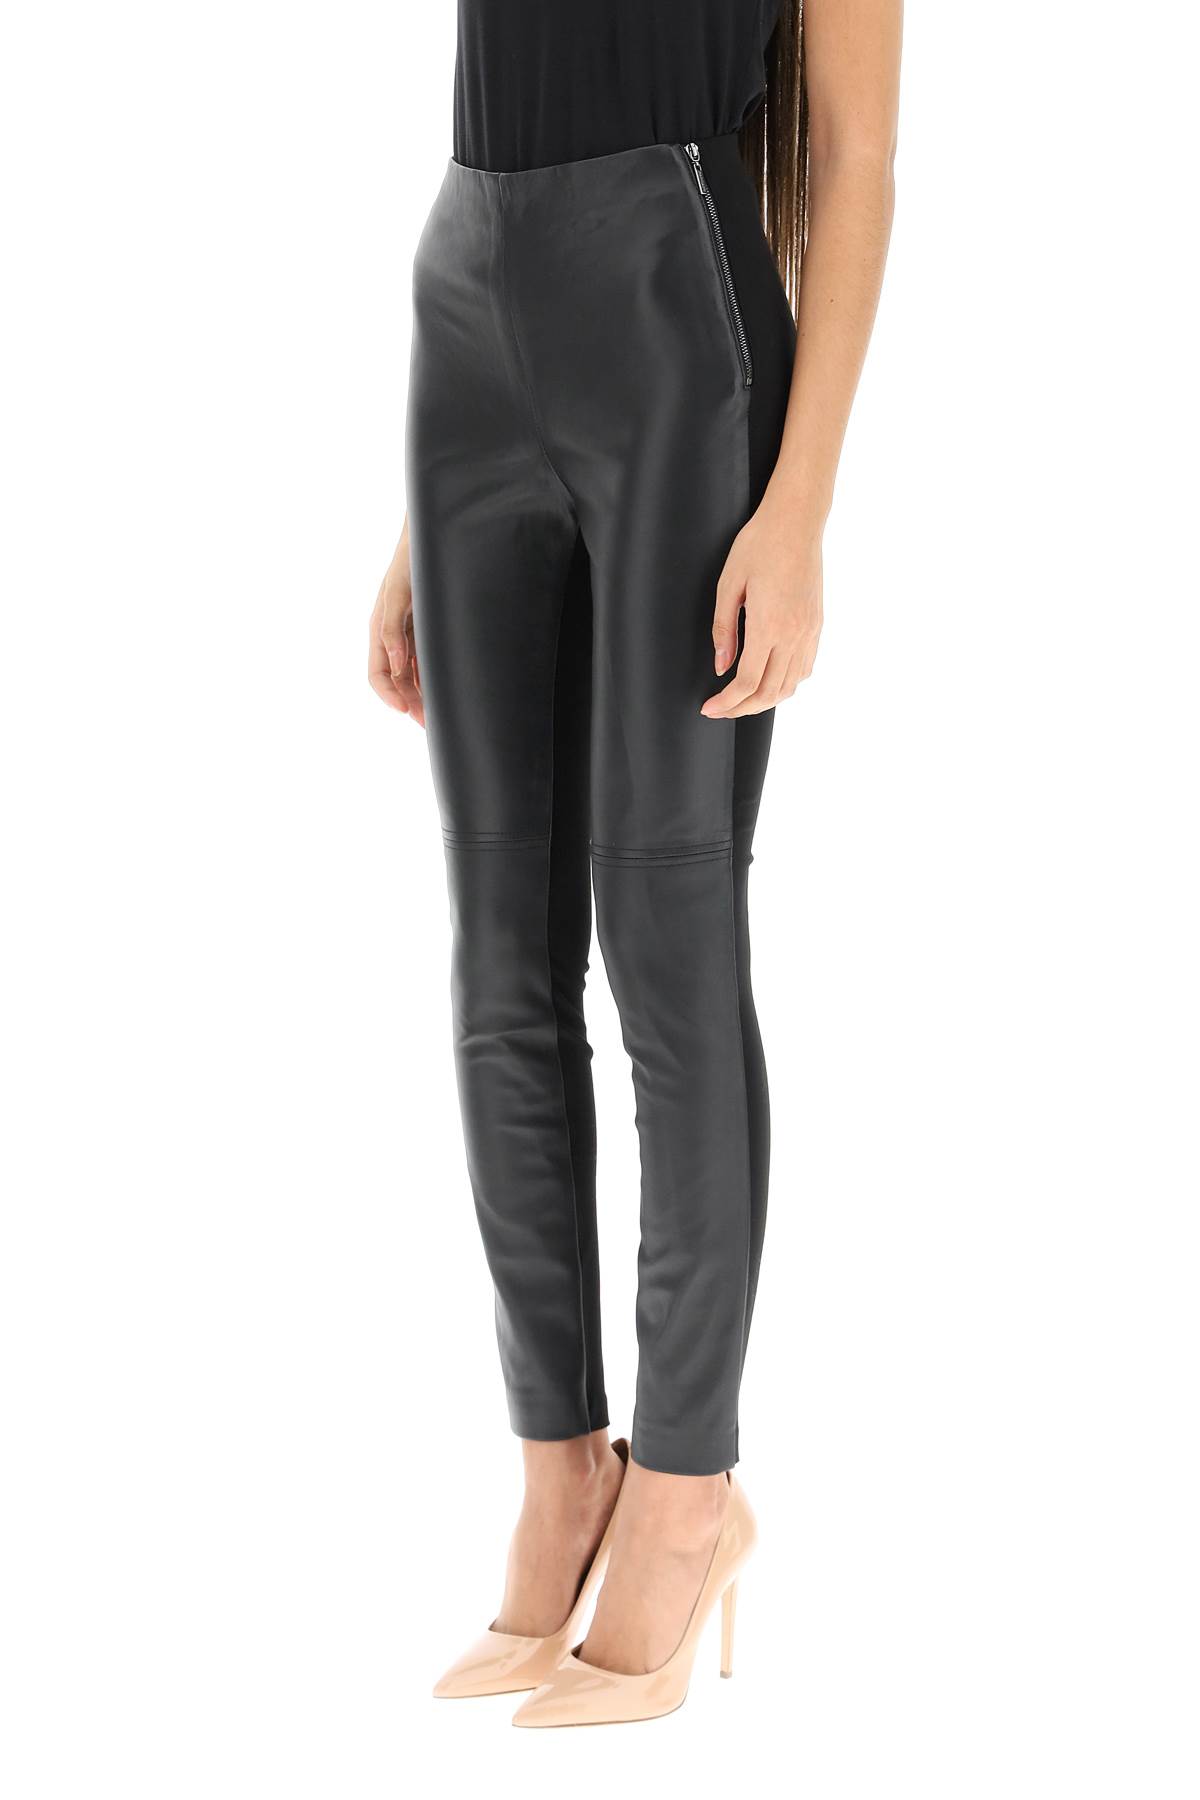 Shop Guess By Marciano Leather And Jersey Leggings In Jet Black A996 (black)